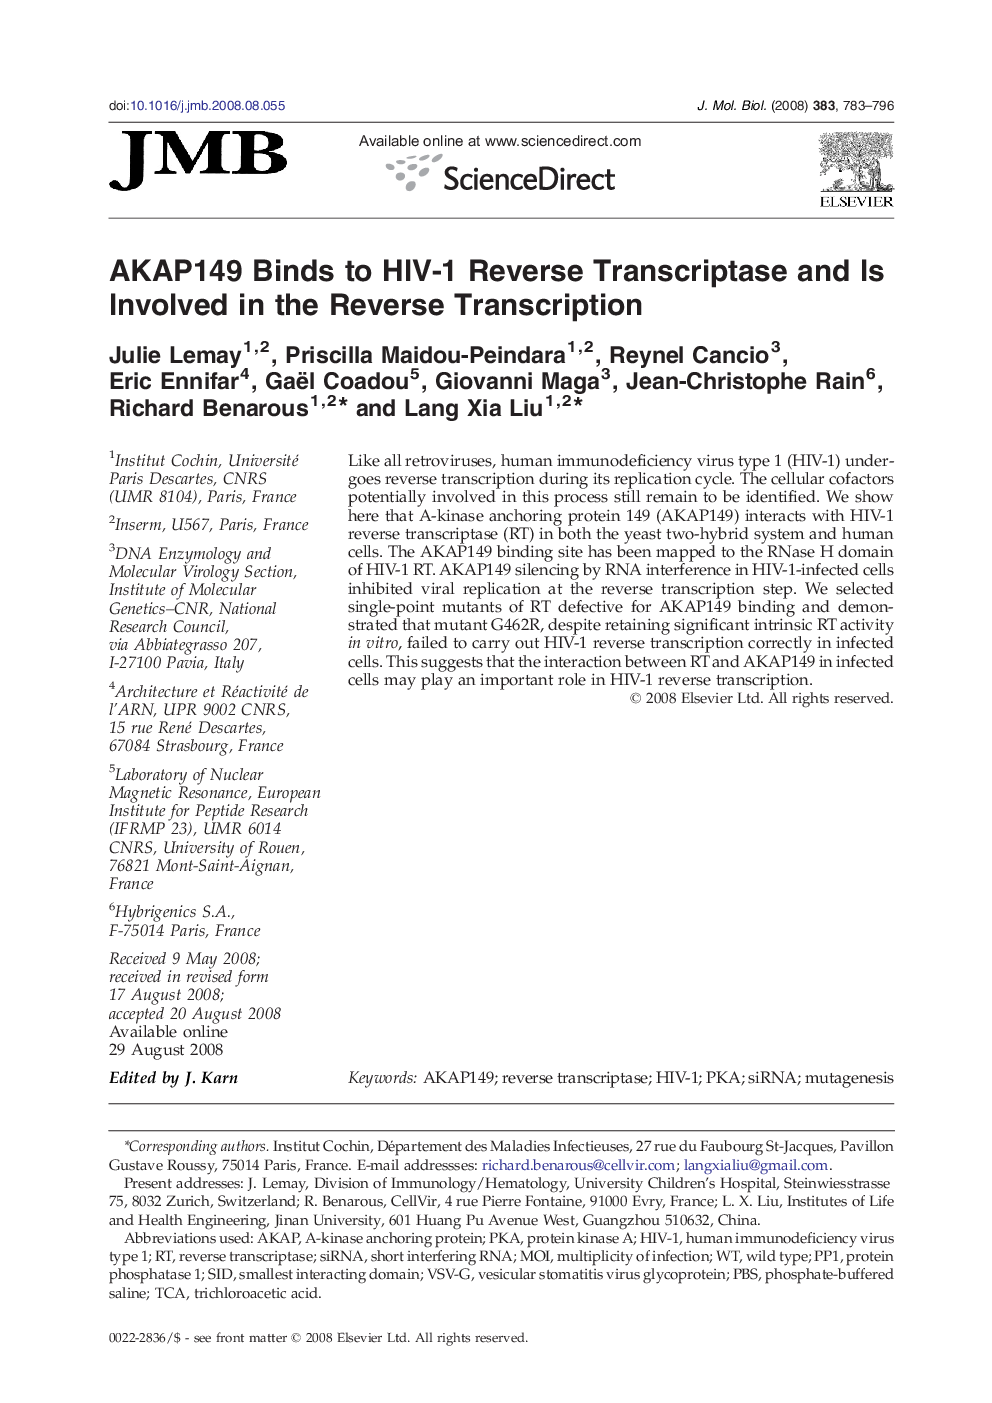 AKAP149 Binds to HIV-1 Reverse Transcriptase and Is Involved in the Reverse Transcription